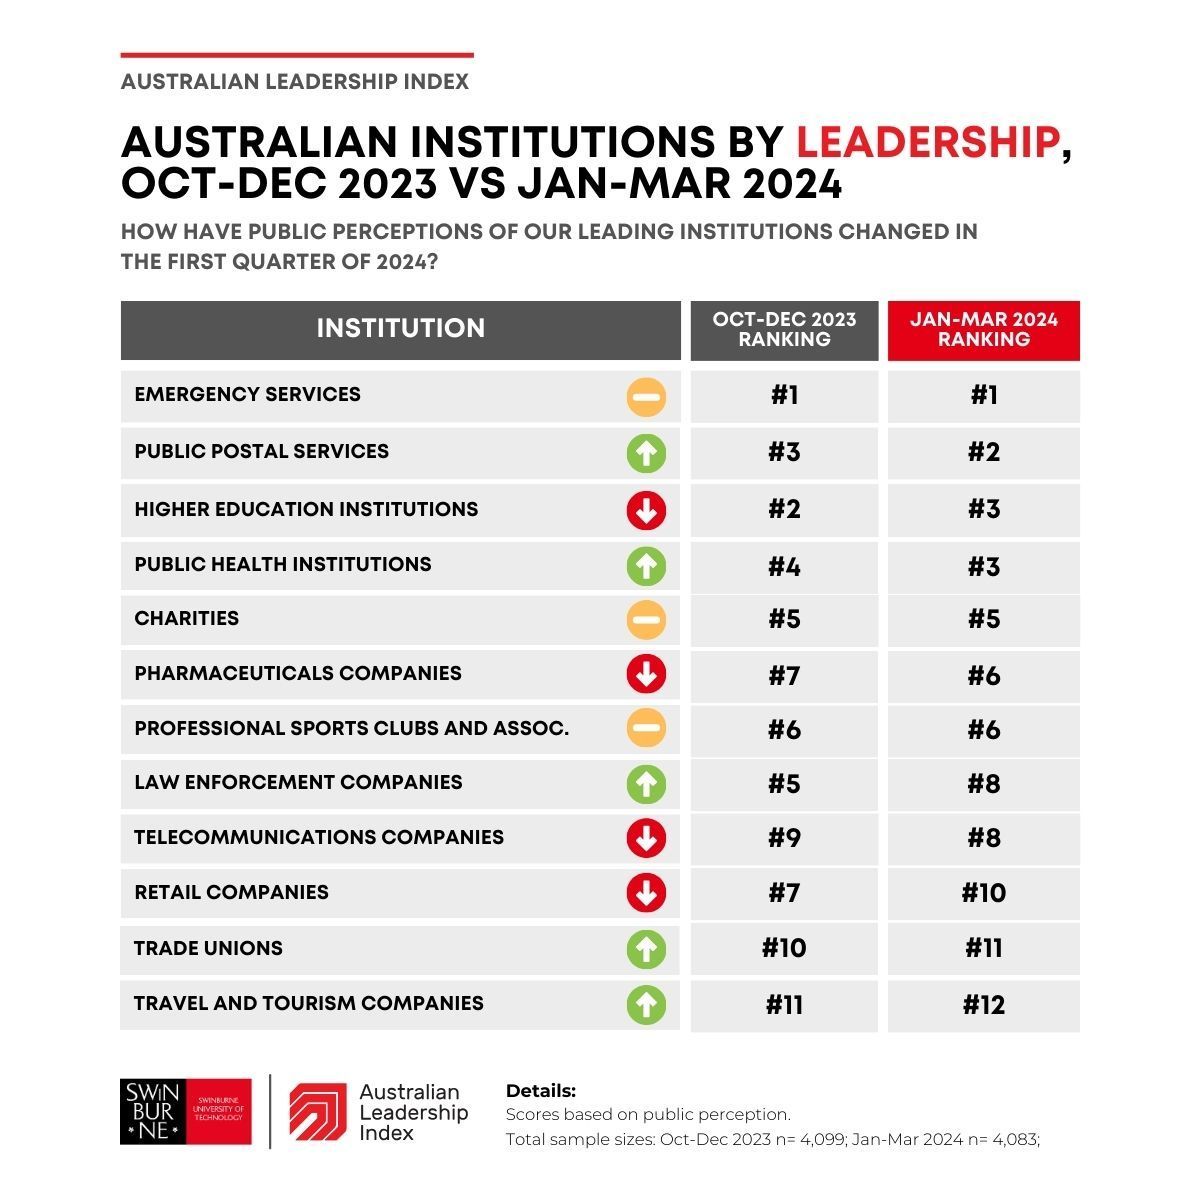 Leadership perceptions remained stable in the first quarter of 2024 with public institutions continuing to rate highly. Postal services were the biggest improver, while supermarkets and the federal government dropped sharply. Explore more results 👉 buff.ly/3rCAnfs